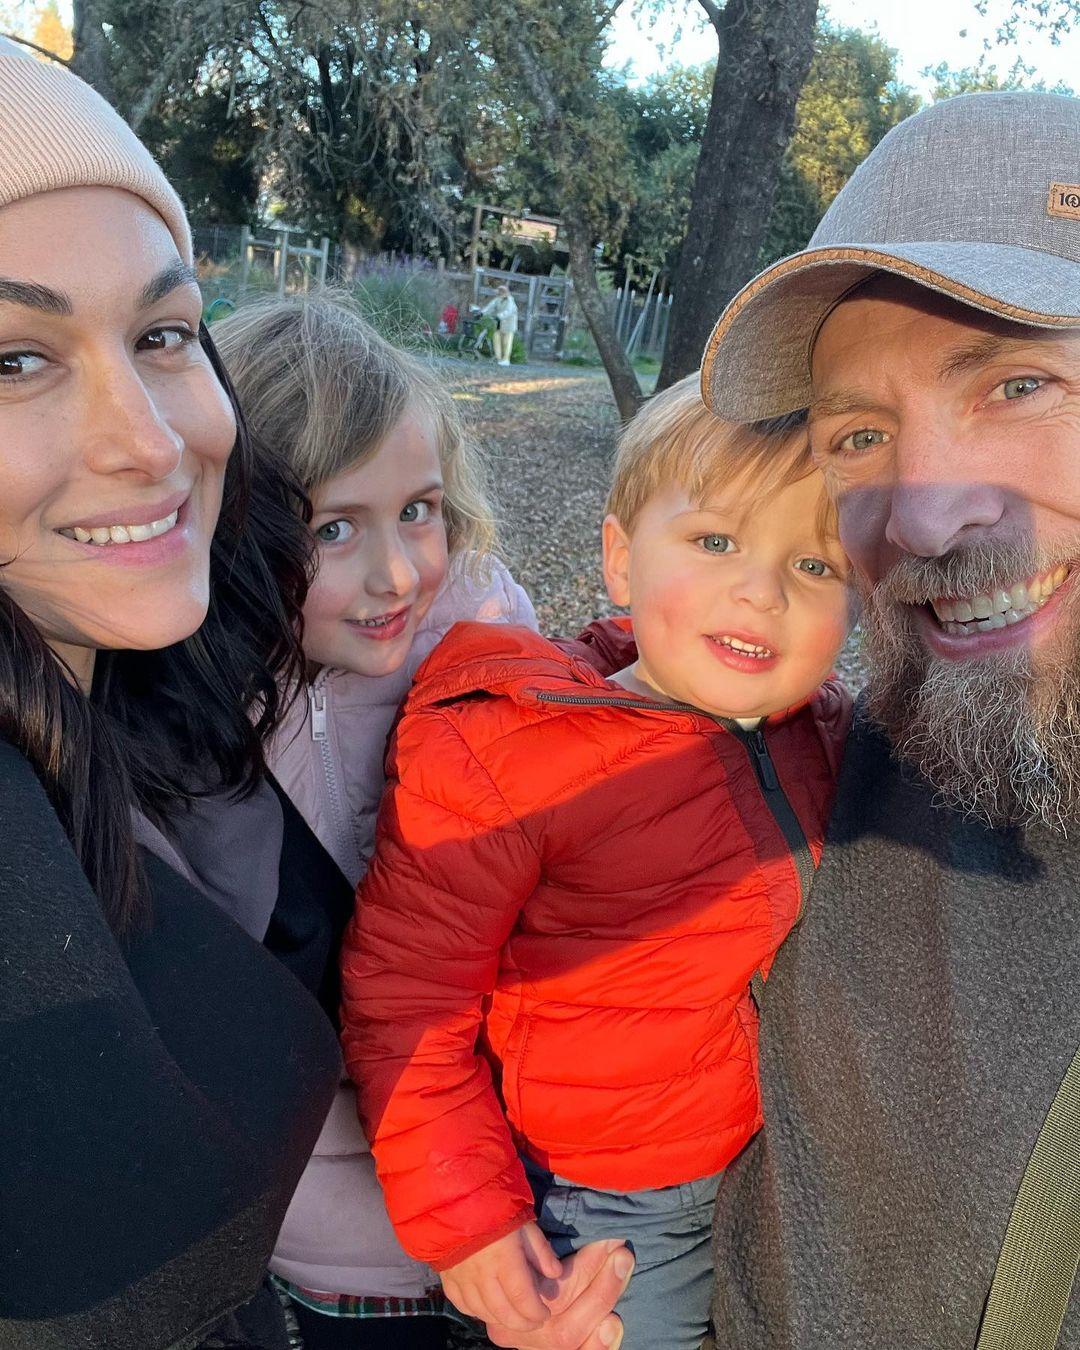 Brie Bella and her family